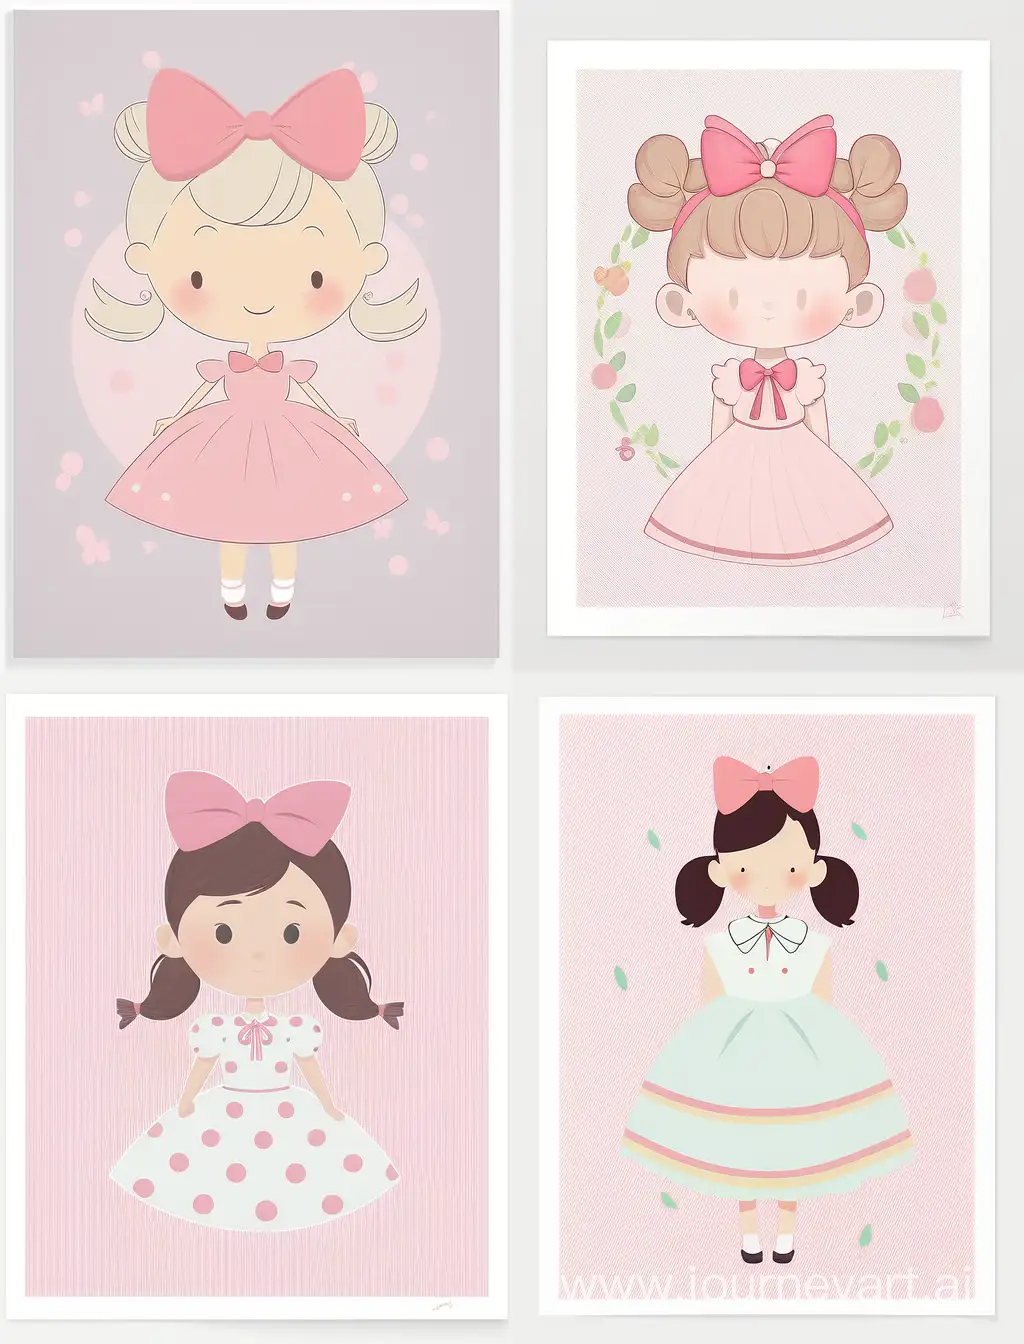 A whimsical nursery poster of cute rosy cheeks girl wearing a pink dress with dark spots and a bow in her hair, pastel colors, soft color